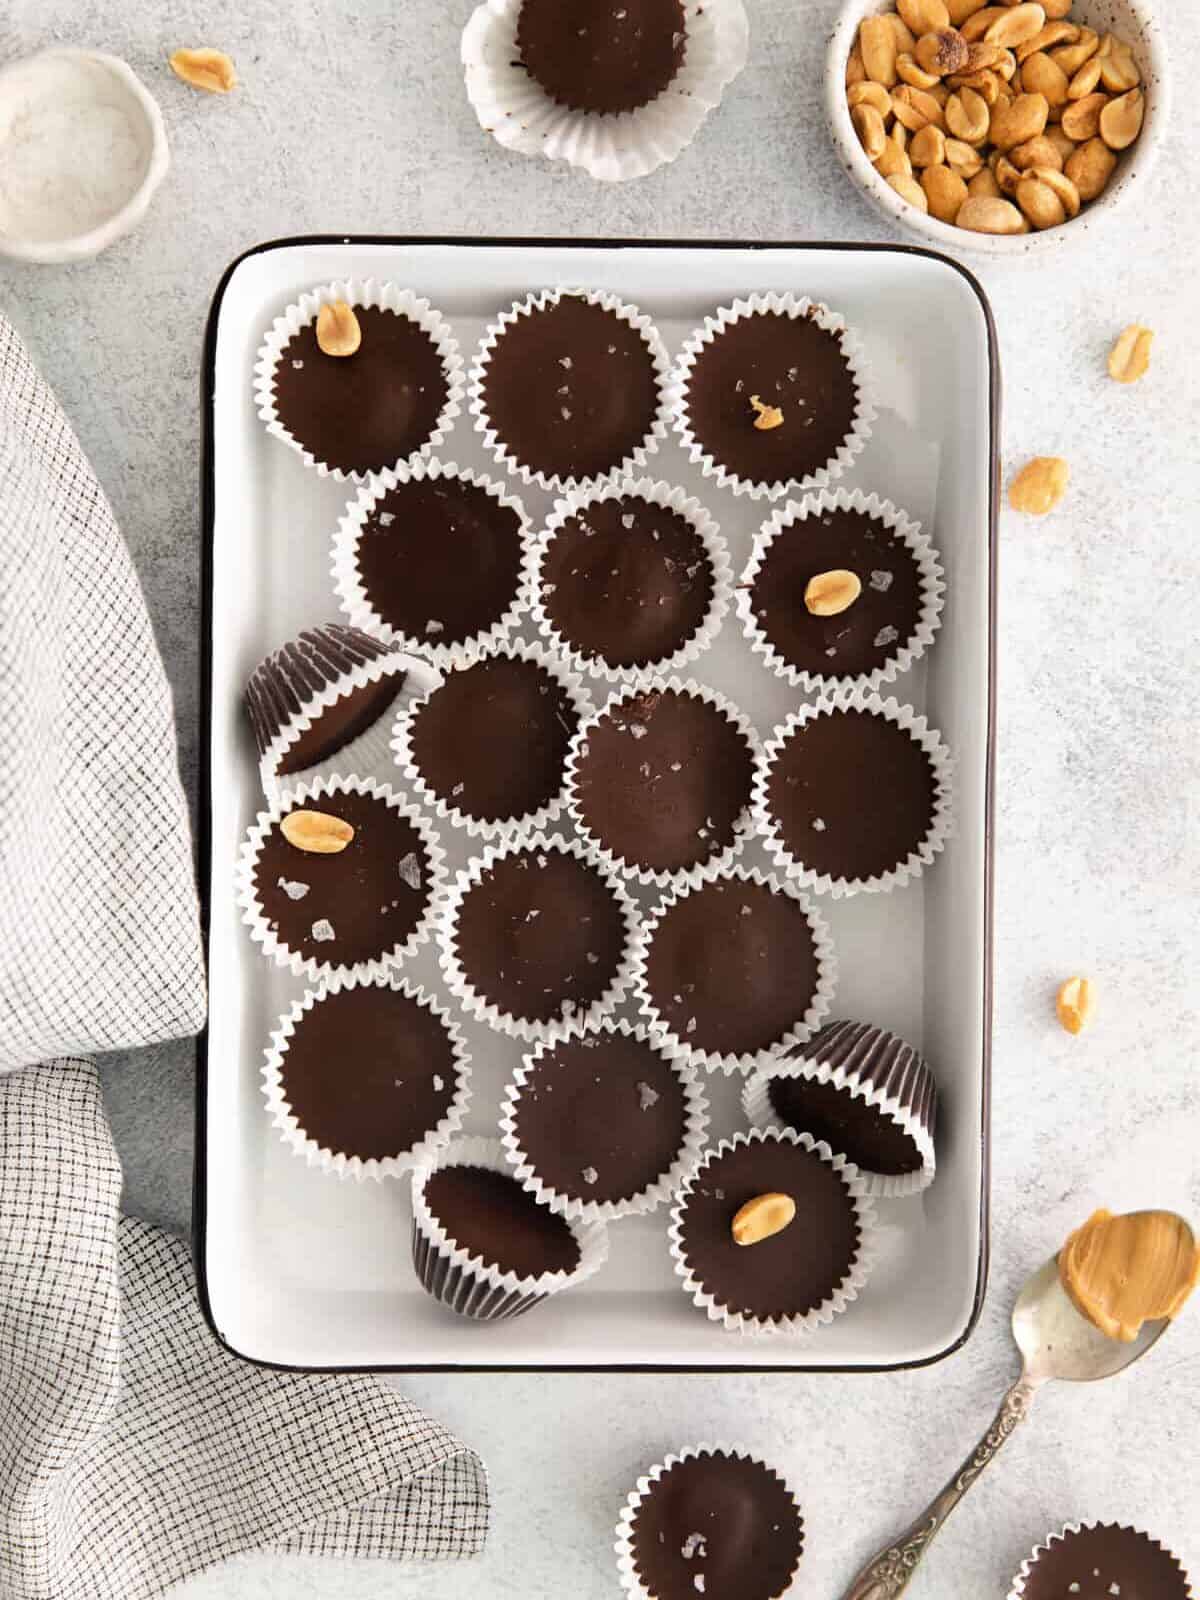 Chocolate peanut butter cups on a tray with peanuts.